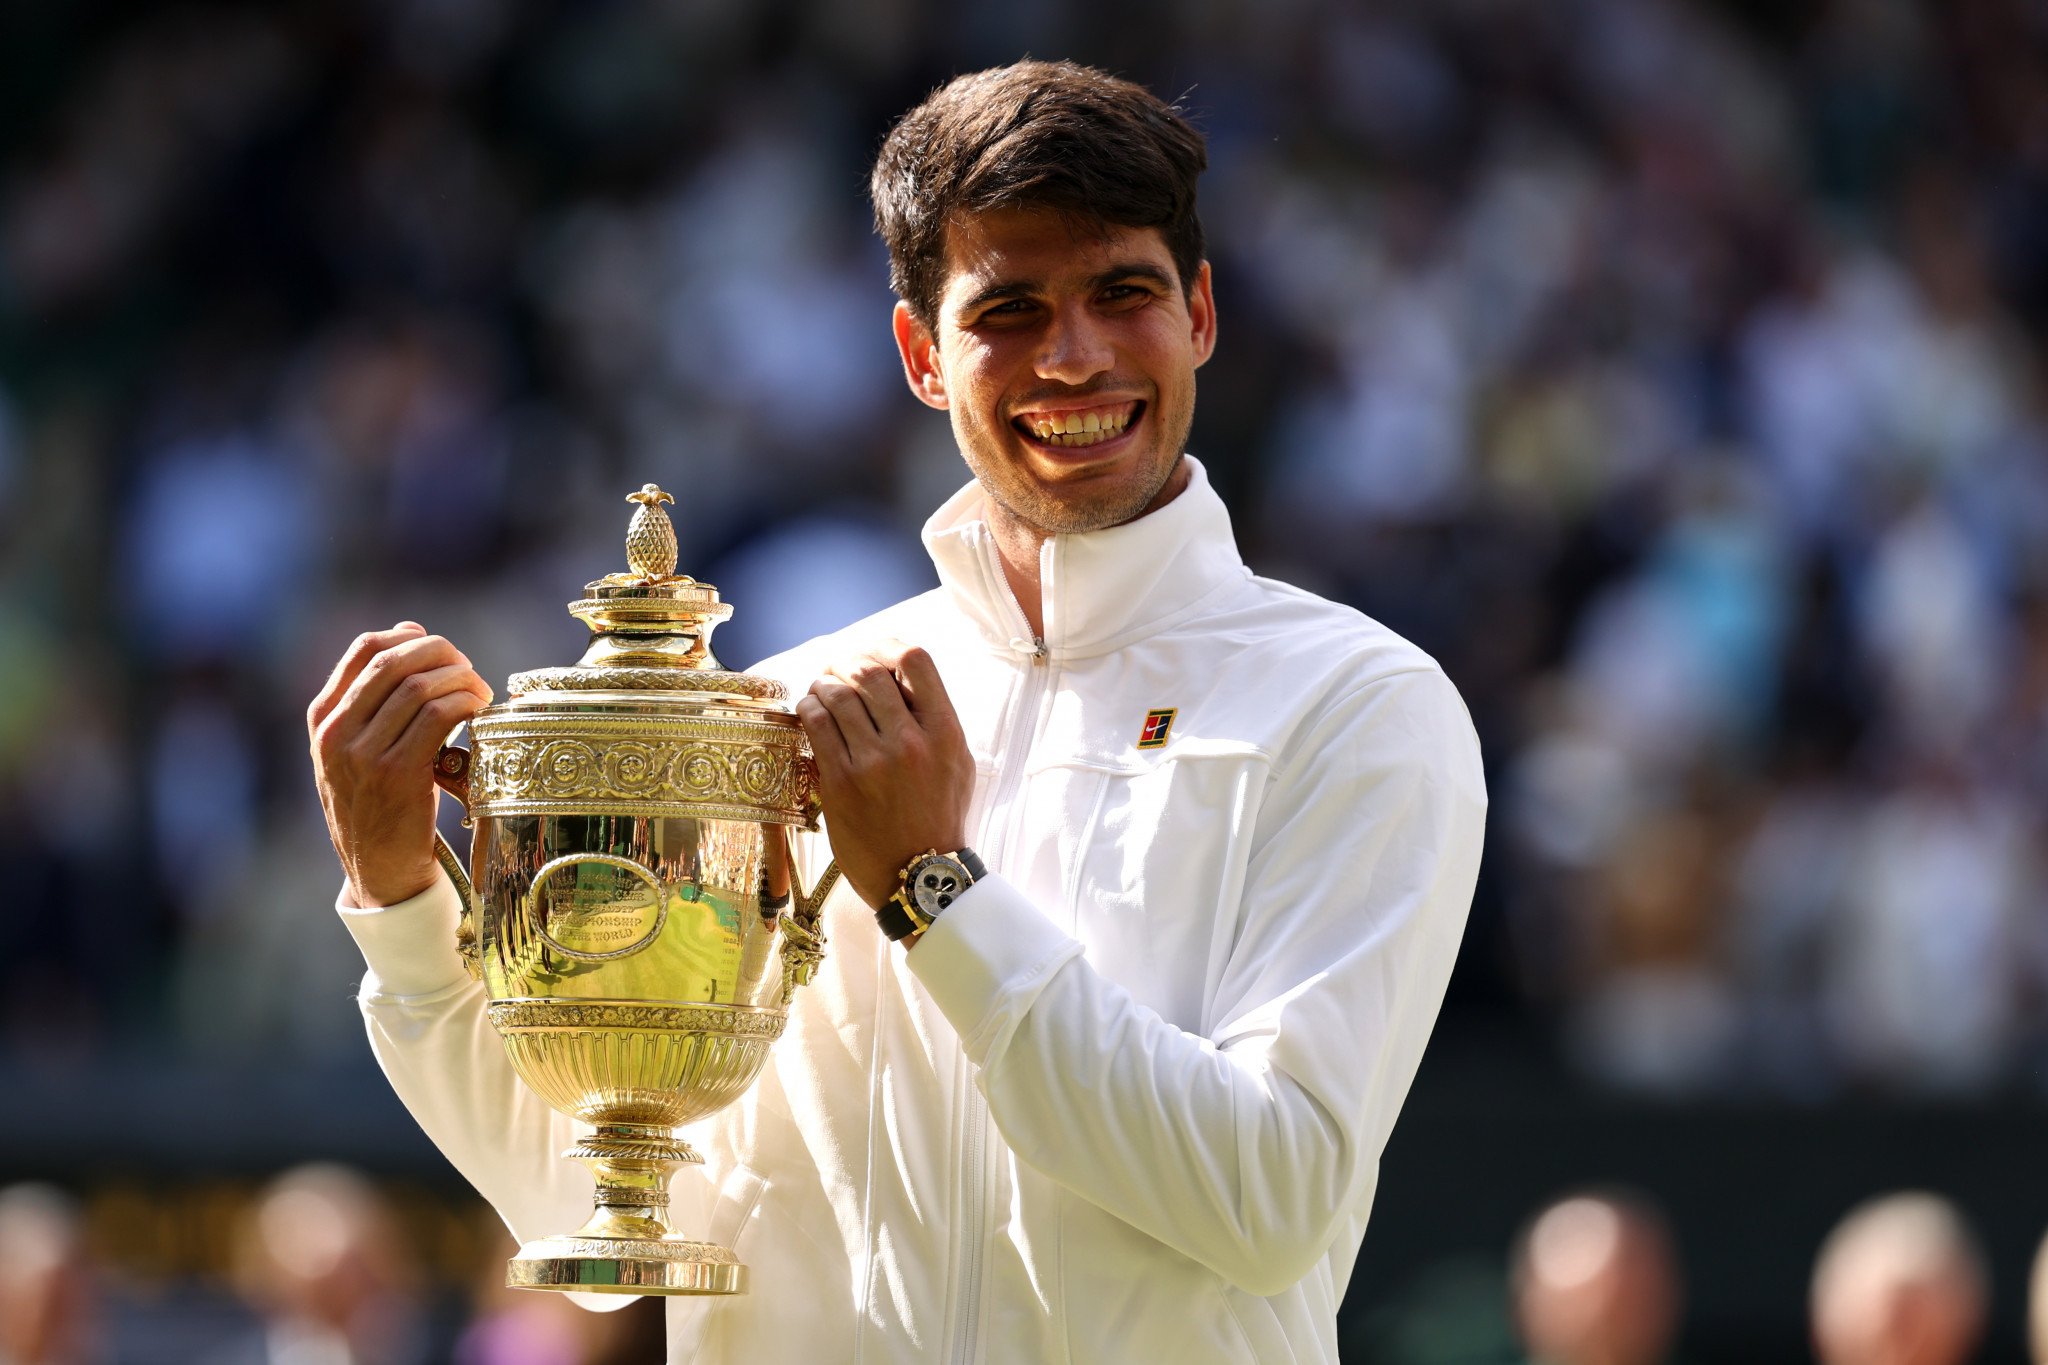 Carlos Alcaraz triumphed in the men's Wimbledon final on Sunday. GETTY IMAGES